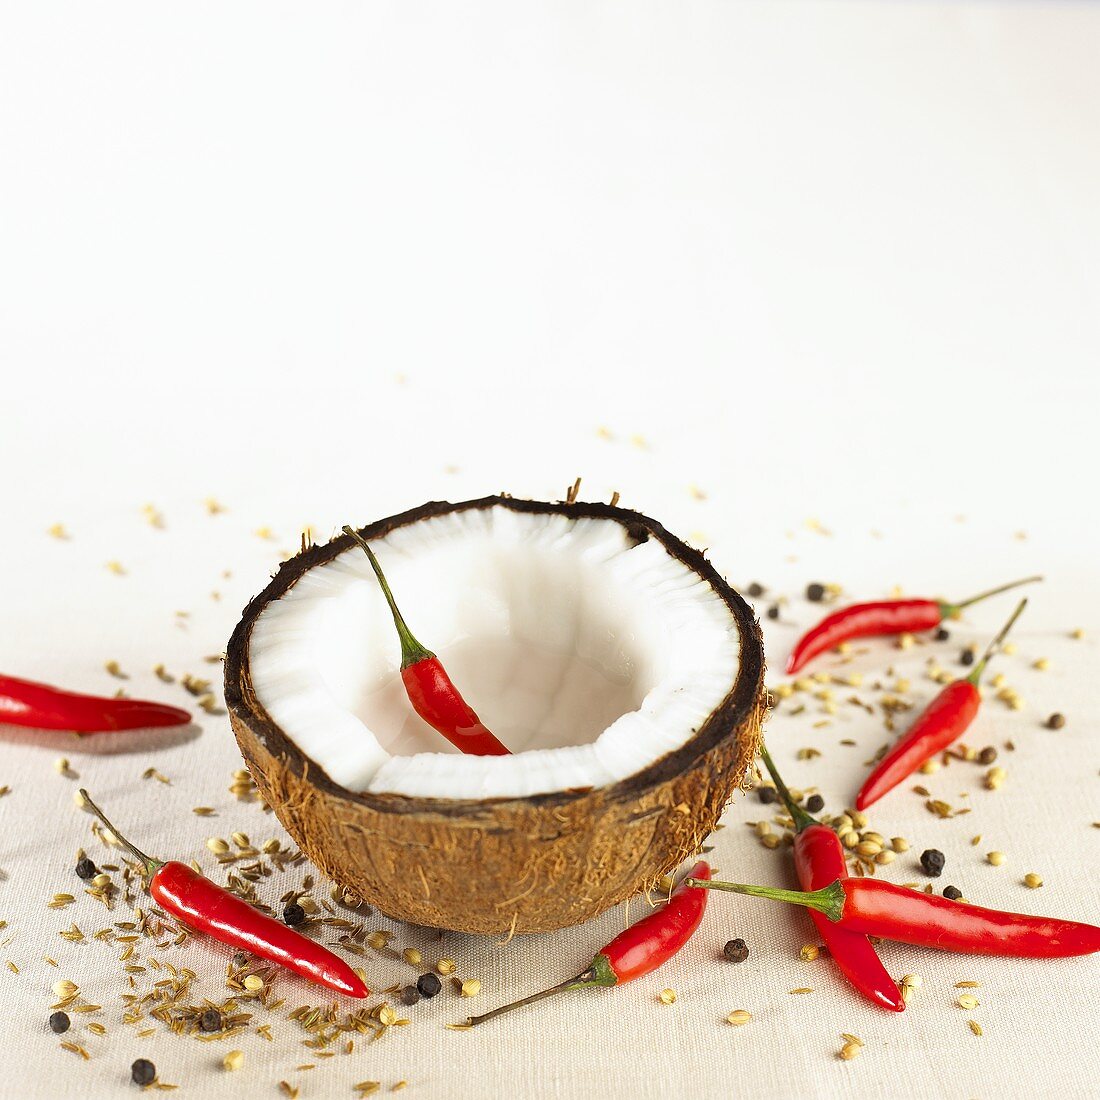 Coconut half with chili peppers and spices